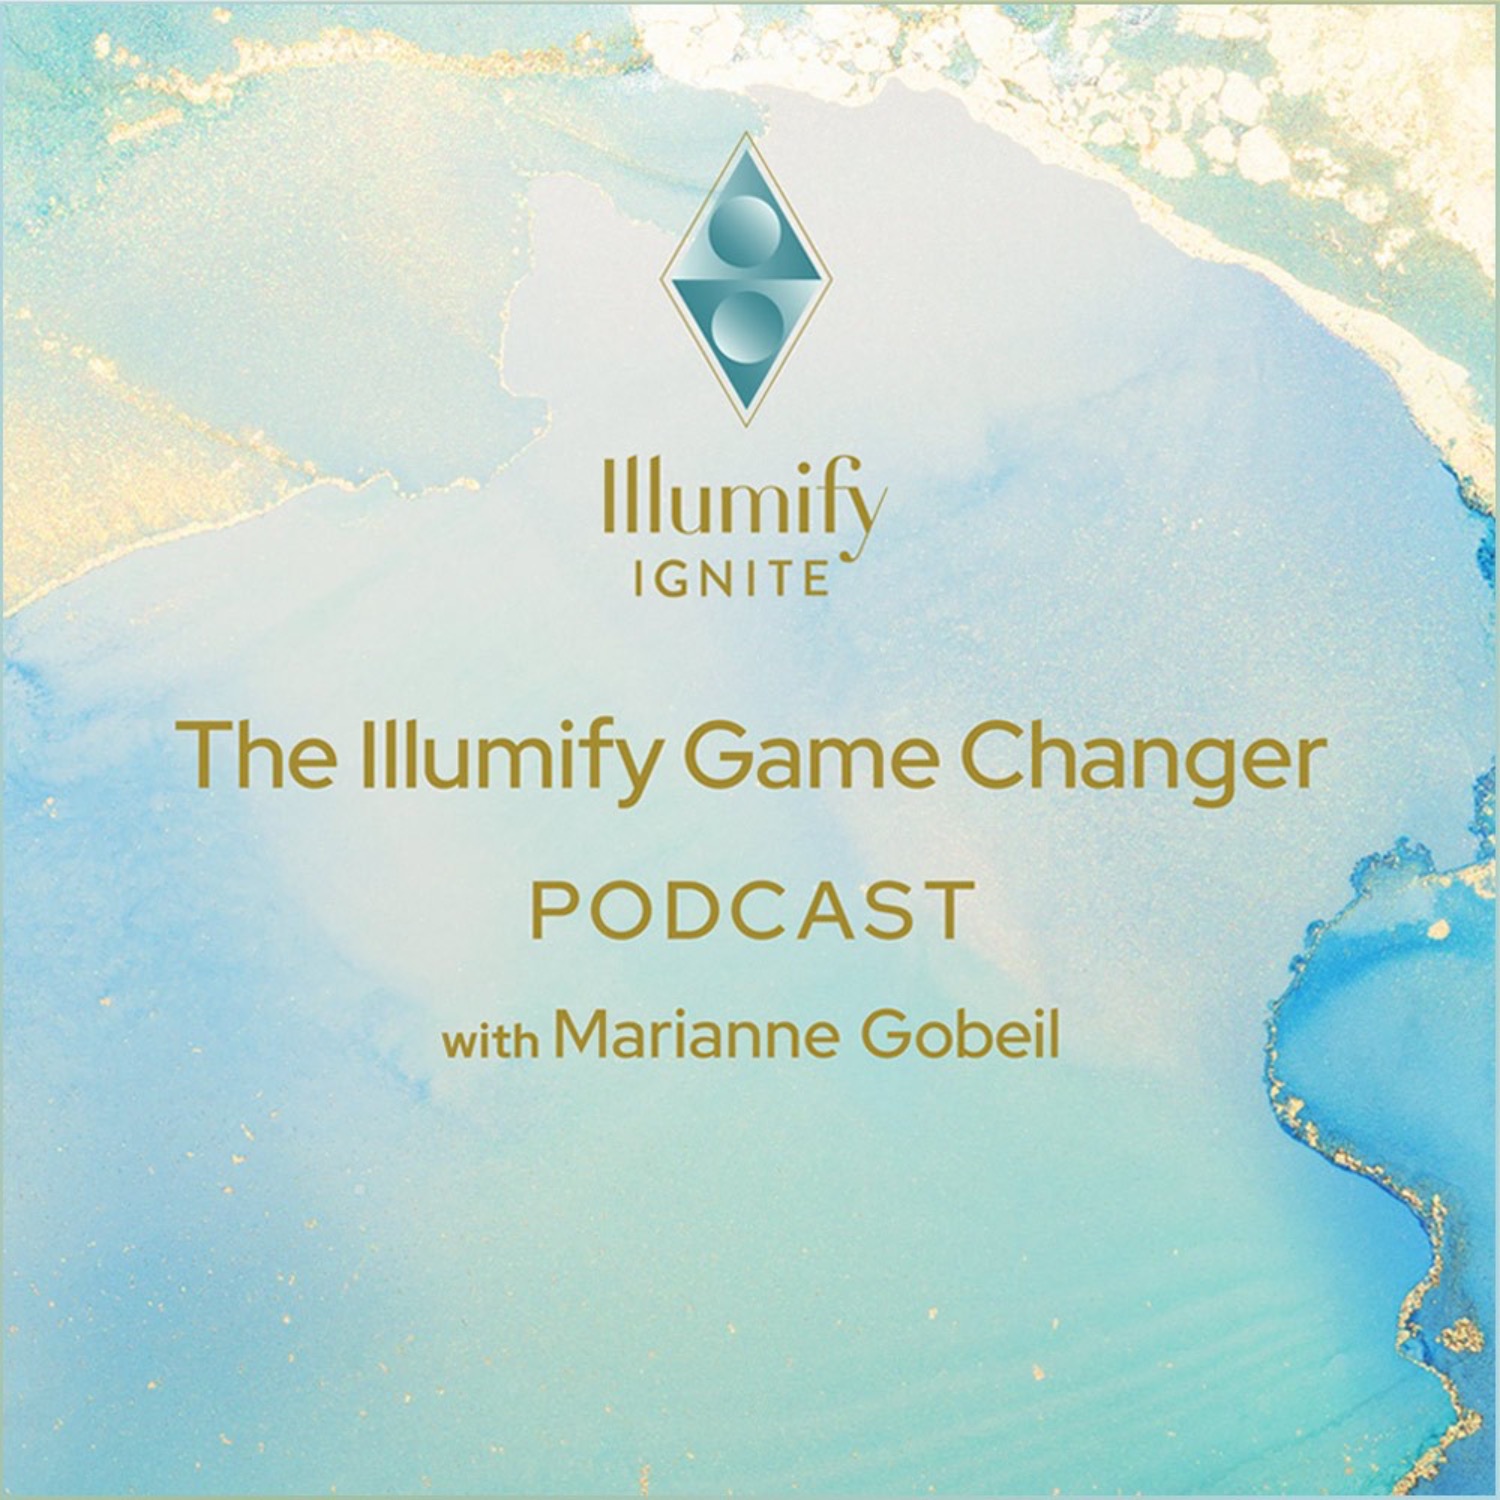 The Illumify Game Changer